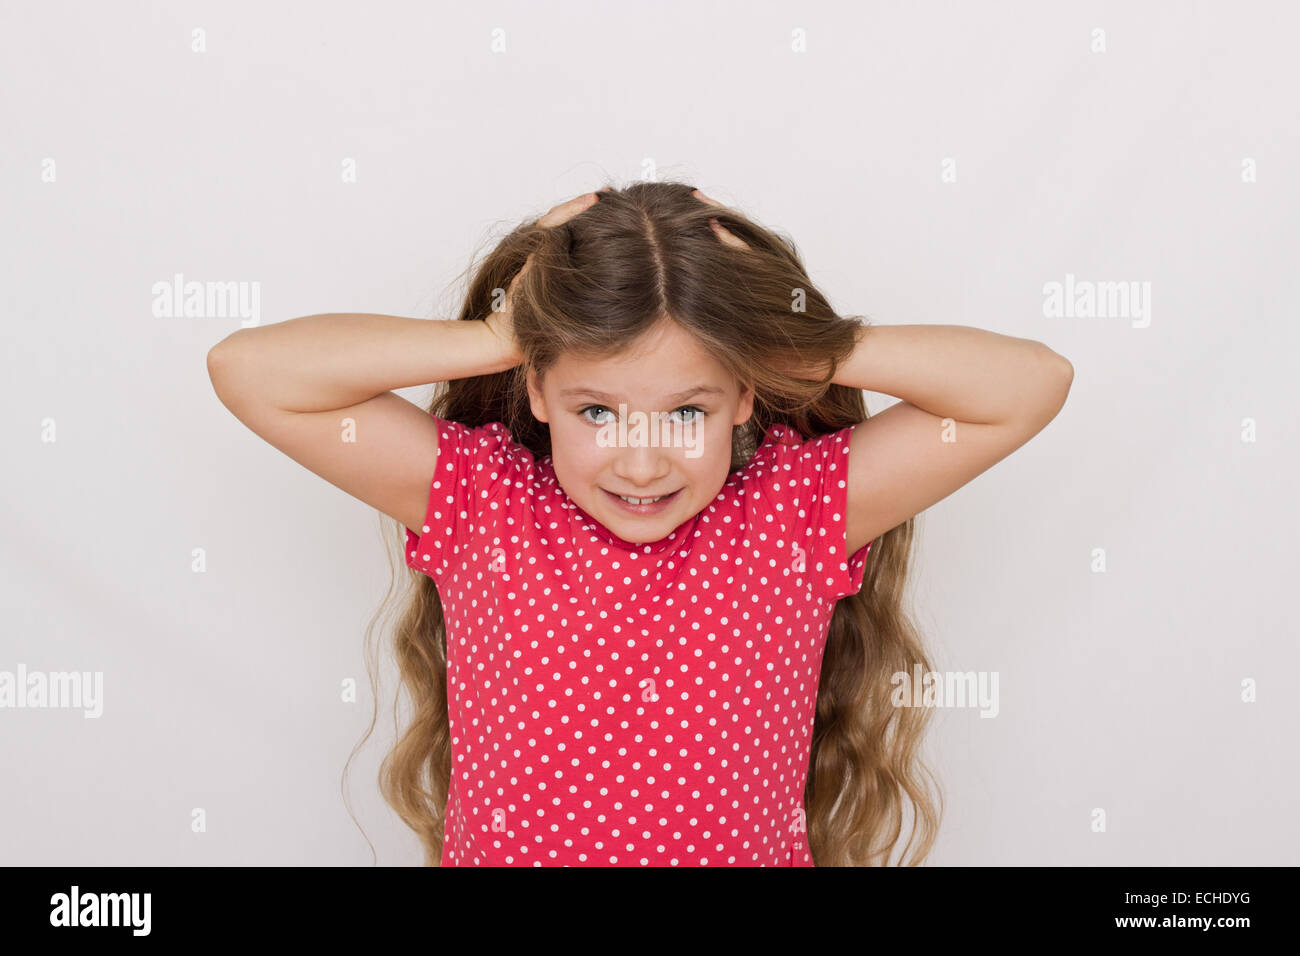 A girl tearing her hair Stock Photo